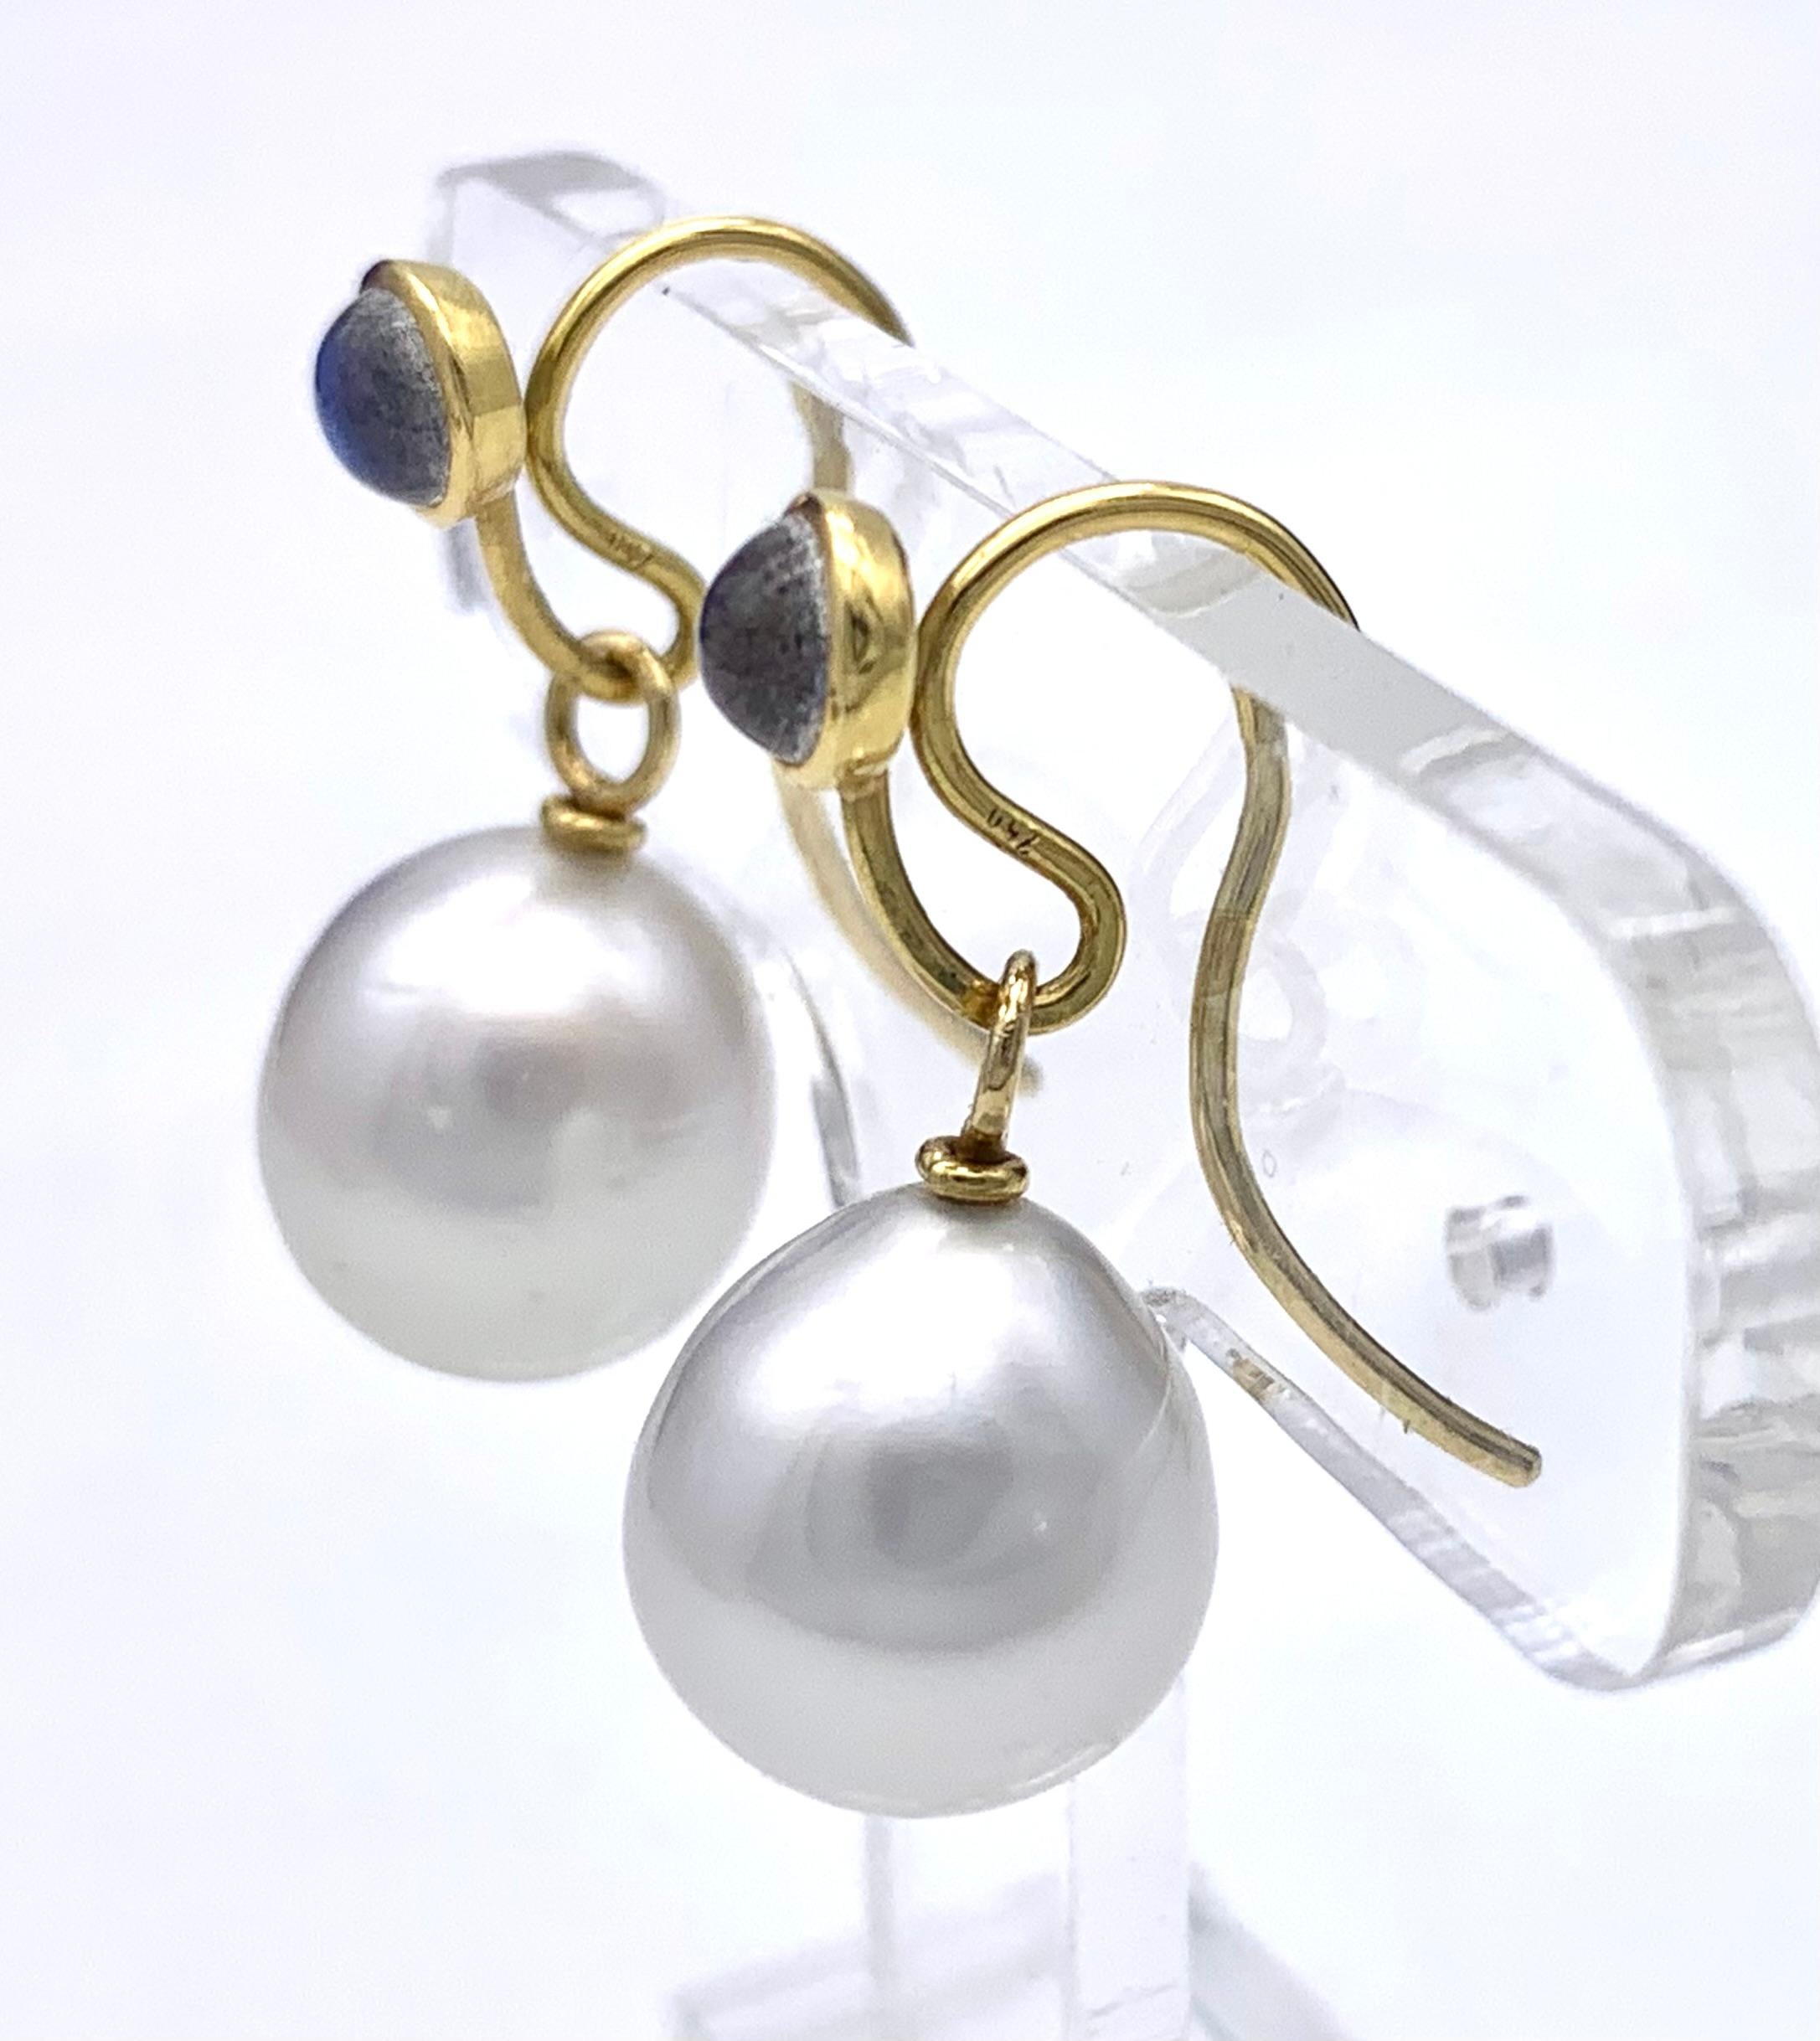 This wonderful pair of white South Sea pearl drop dangle earrings are suspended from gold wires decorated with moonstone cabochons mounted in 18 karat yellow gold. The pearls have a fine even luster. The hooks are impressed with 750 for 18 karat.   